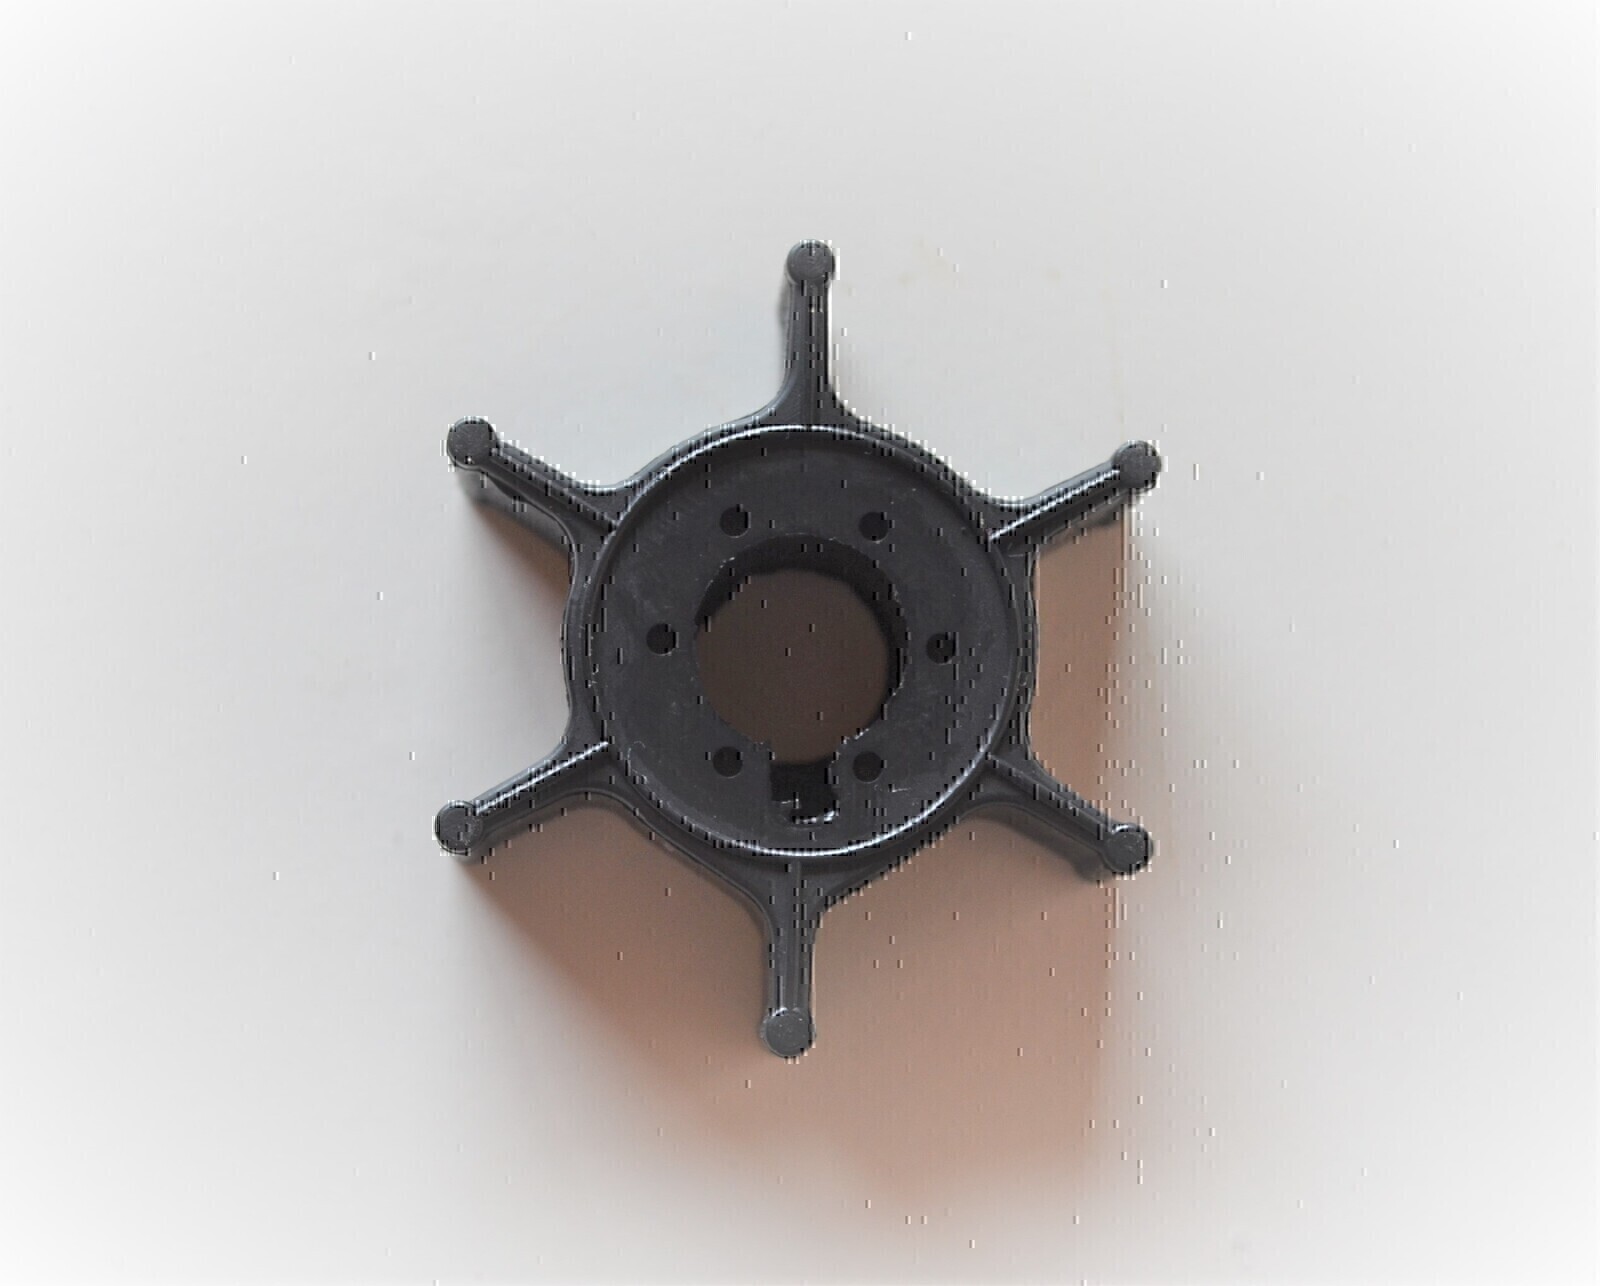 WATER PUMP IMPELLER FOR YAMAHA 4HP 5HP 2 STROKE OUTBOARD # 6E0-44352-00